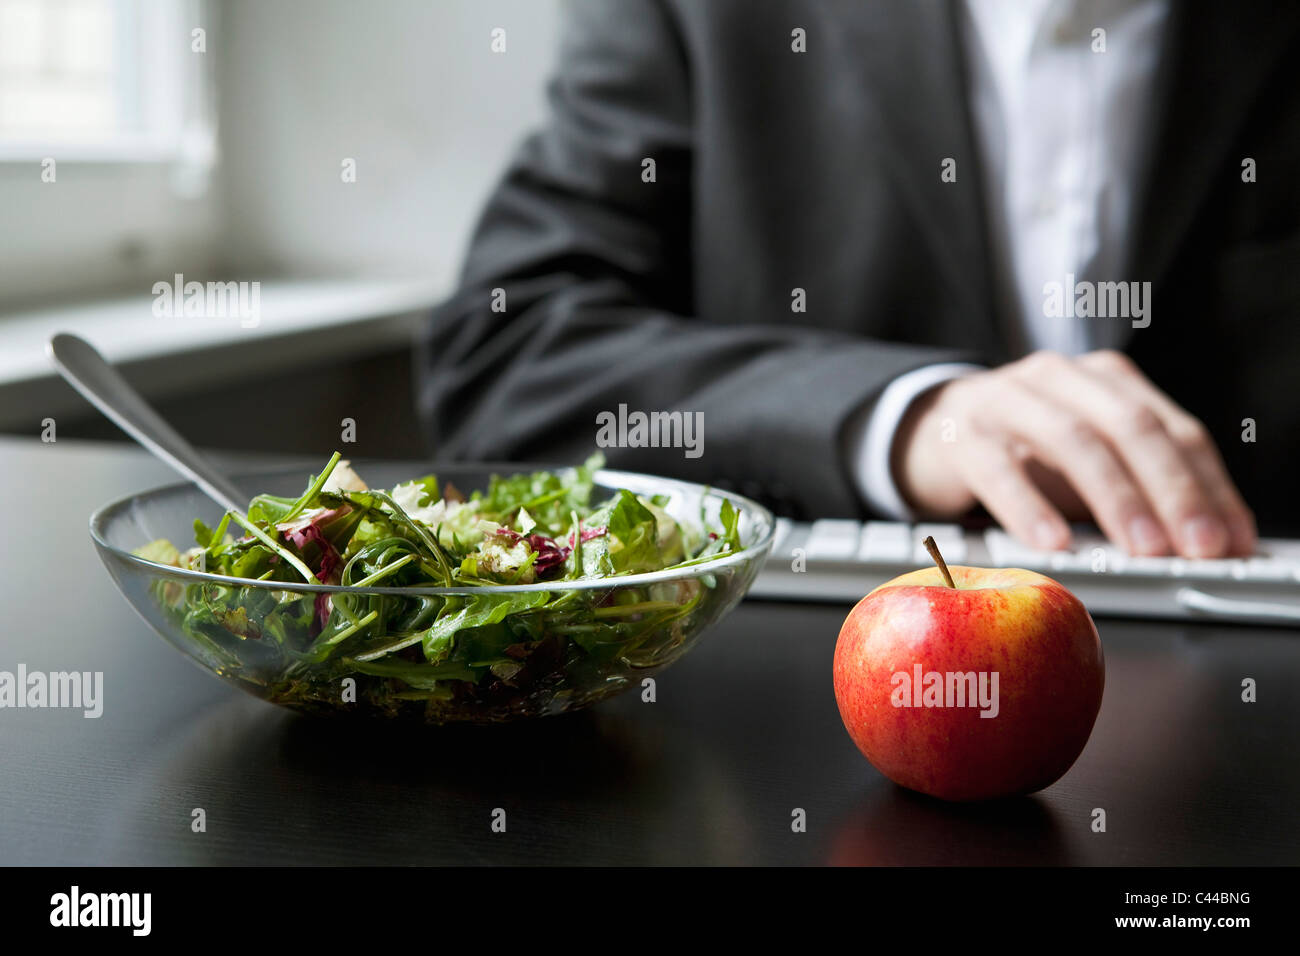 Healthy work lunch Stock Photo